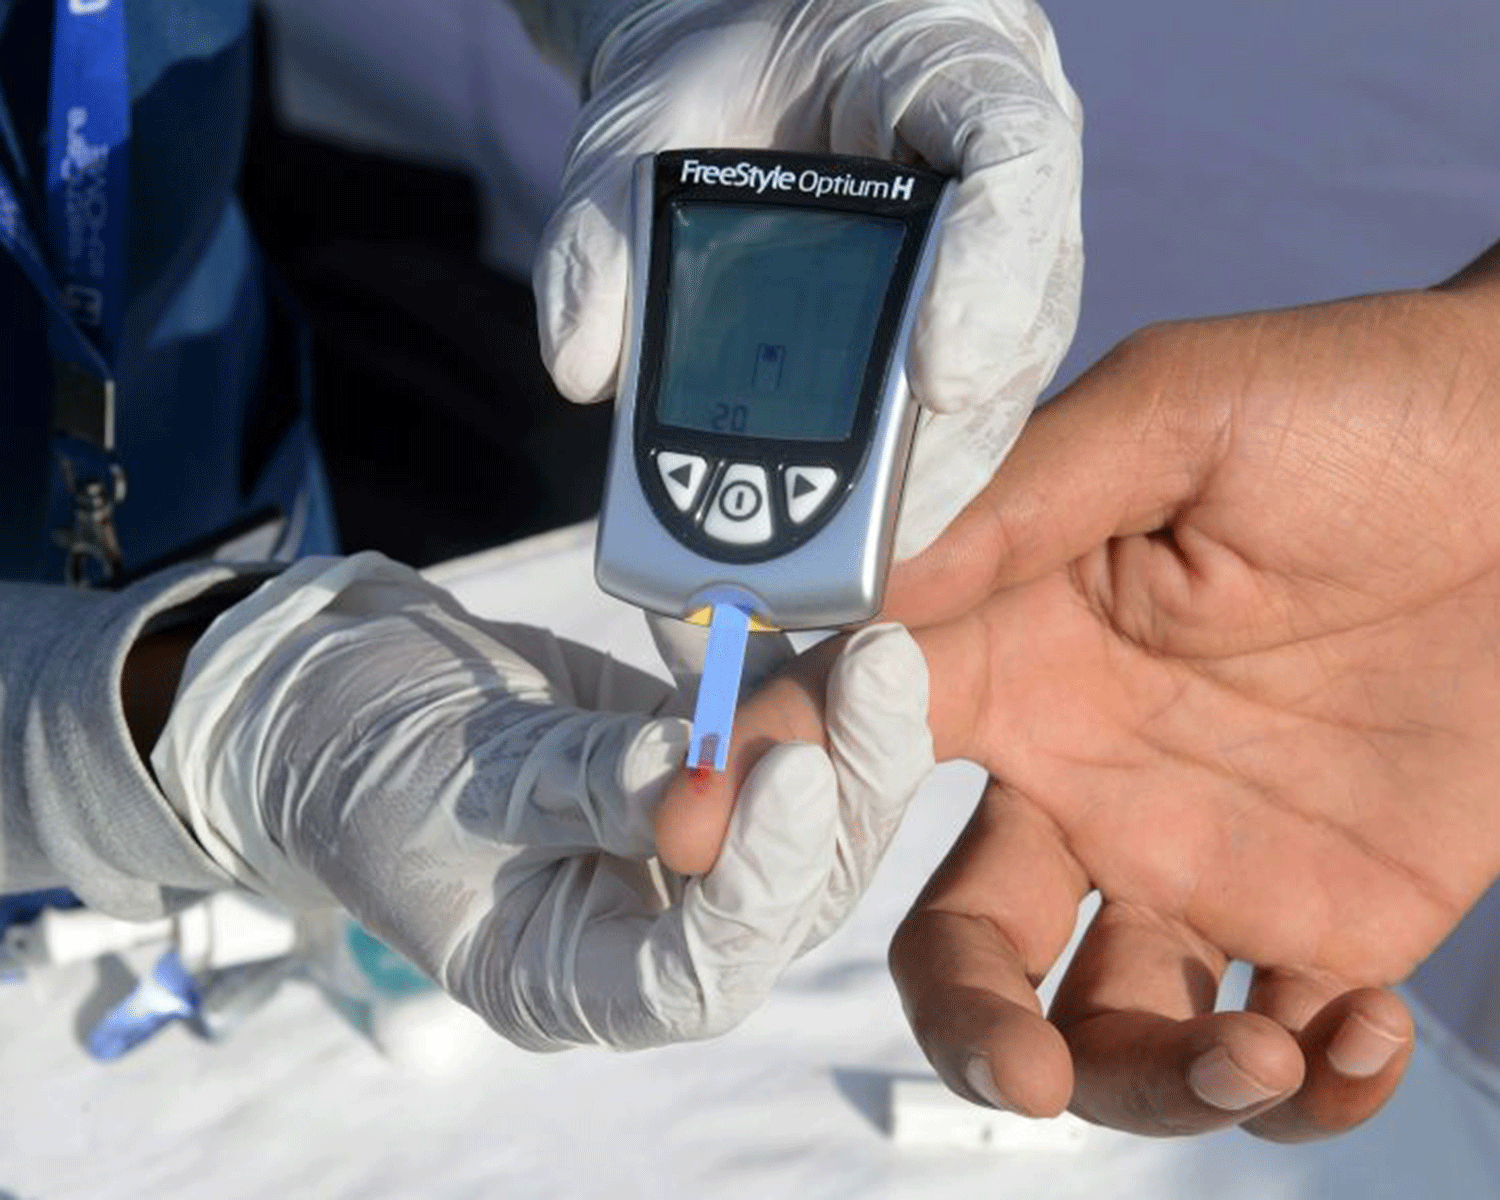 Diabetes has 'quadrupled' around world in about 30 years, says WHO